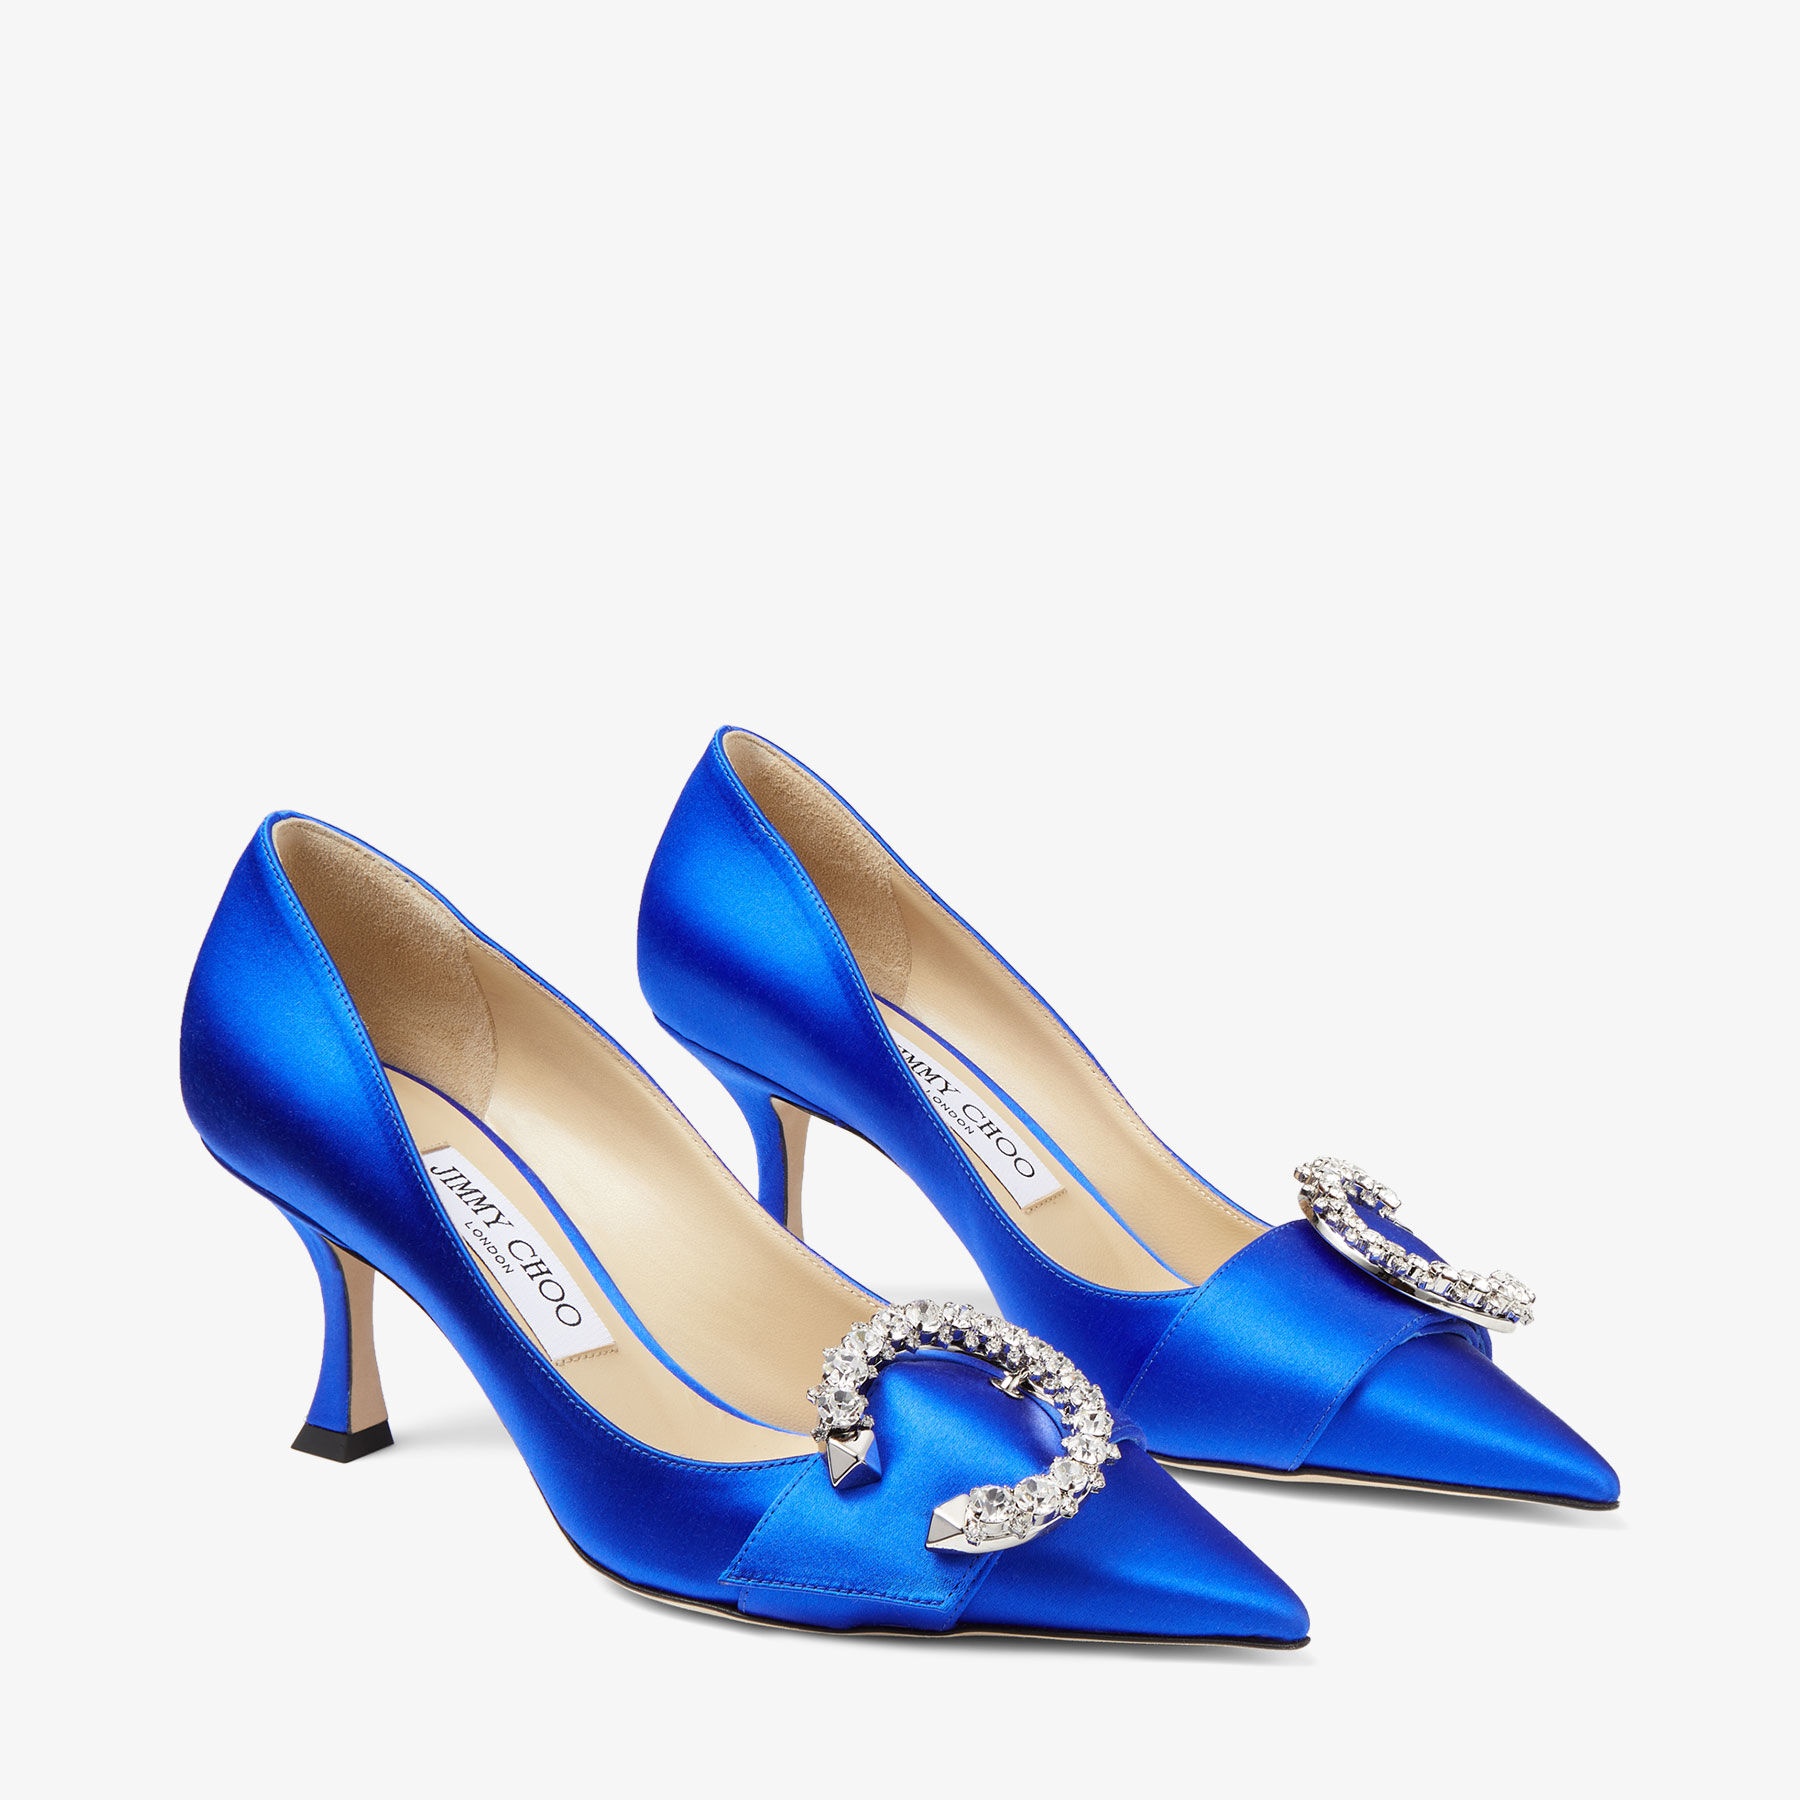 JIMMY CHOO Melva 70 Ultraviolet Satin Pointed-Toe Pumps with 